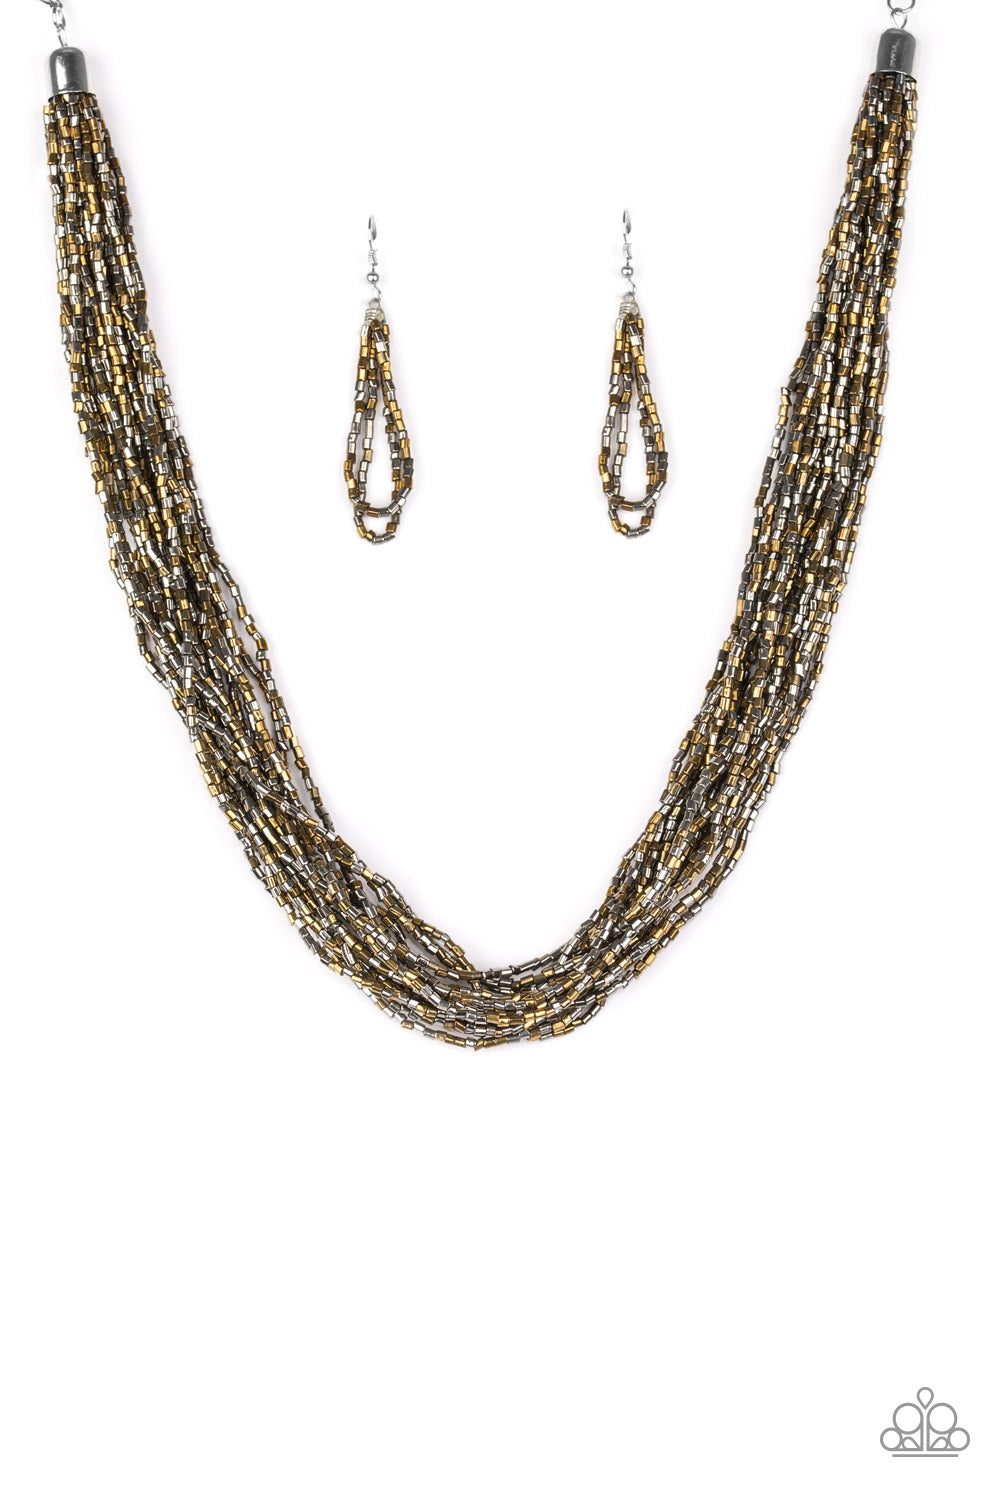 Paparazzi Accessories - The Speed of STARLIGHT- Brass and Gunmetal Necklace